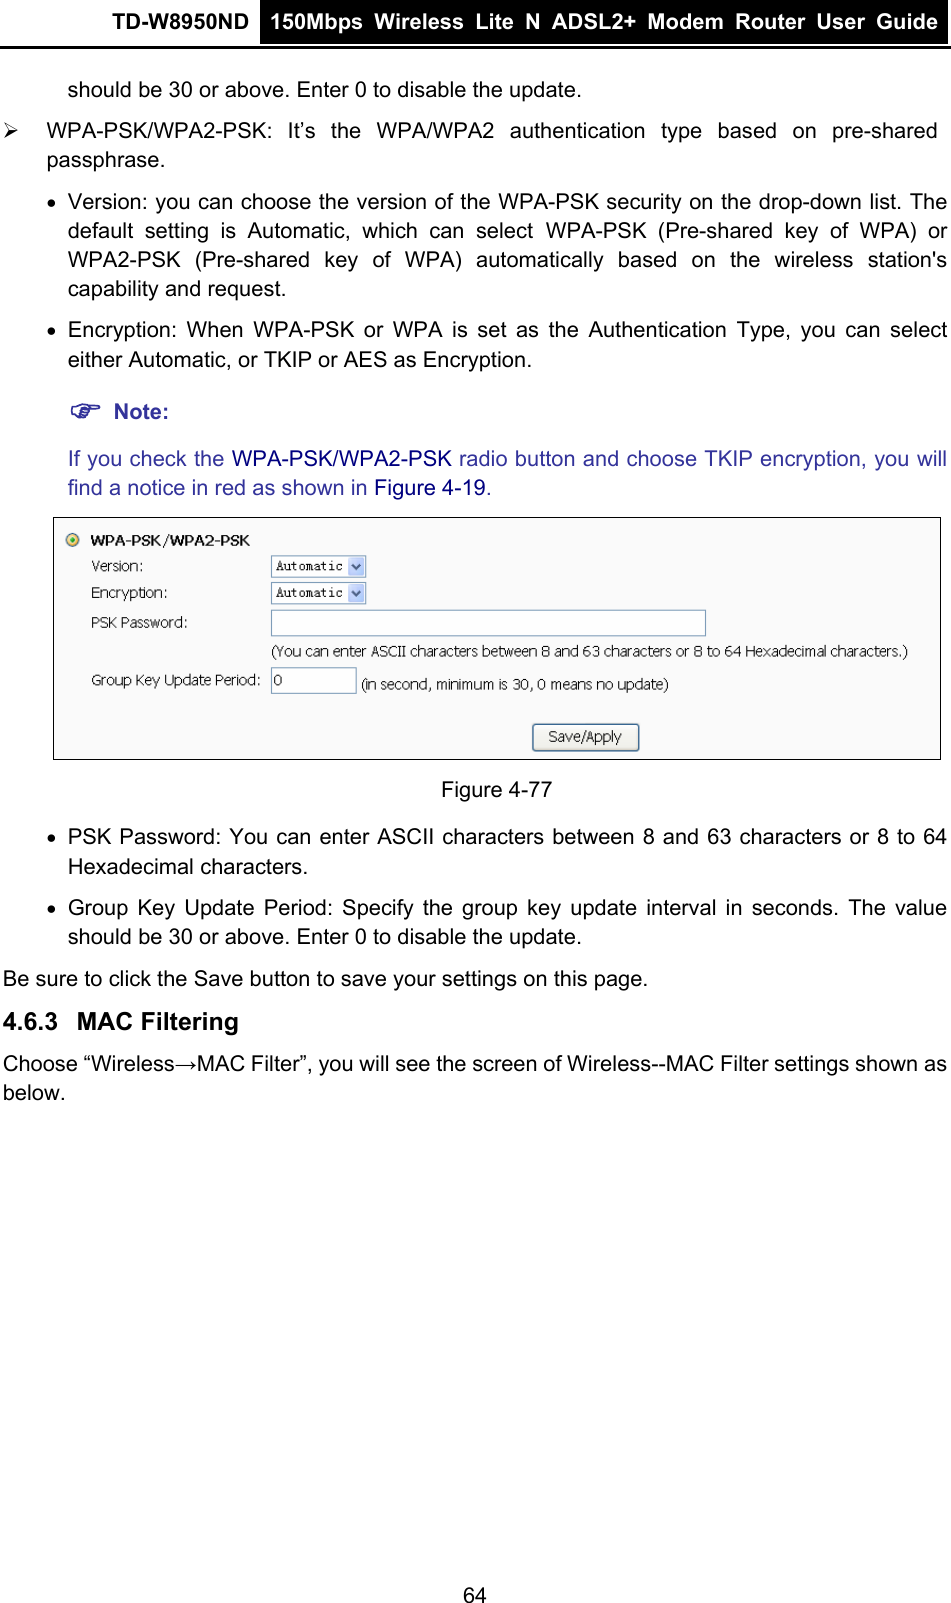 TD-W8950ND  150Mbps Wireless Lite N ADSL2+ Modem Router User Guide  should be 30 or above. Enter 0 to disable the update. ¾  WPA-PSK/WPA2-PSK: It’s the WPA/WPA2 authentication type based on pre-shared passphrase.  • Version: you can choose the version of the WPA-PSK security on the drop-down list. The default setting is Automatic, which can select WPA-PSK (Pre-shared key of WPA) or WPA2-PSK (Pre-shared key of WPA) automatically based on the wireless station&apos;s capability and request. • Encryption: When WPA-PSK or WPA is set as the Authentication Type, you can select either Automatic, or TKIP or AES as Encryption. ) Note:  If you check the WPA-PSK/WPA2-PSK radio button and choose TKIP encryption, you will find a notice in red as shown in Figure 4-19.  Figure 4-77 • PSK Password: You can enter ASCII characters between 8 and 63 characters or 8 to 64 Hexadecimal characters. • Group Key Update Period: Specify the group key update interval in seconds. The value should be 30 or above. Enter 0 to disable the update. Be sure to click the Save button to save your settings on this page. 4.6.3  MAC Filtering Choose “Wireless→MAC Filter”, you will see the screen of Wireless--MAC Filter settings shown as below. 64 